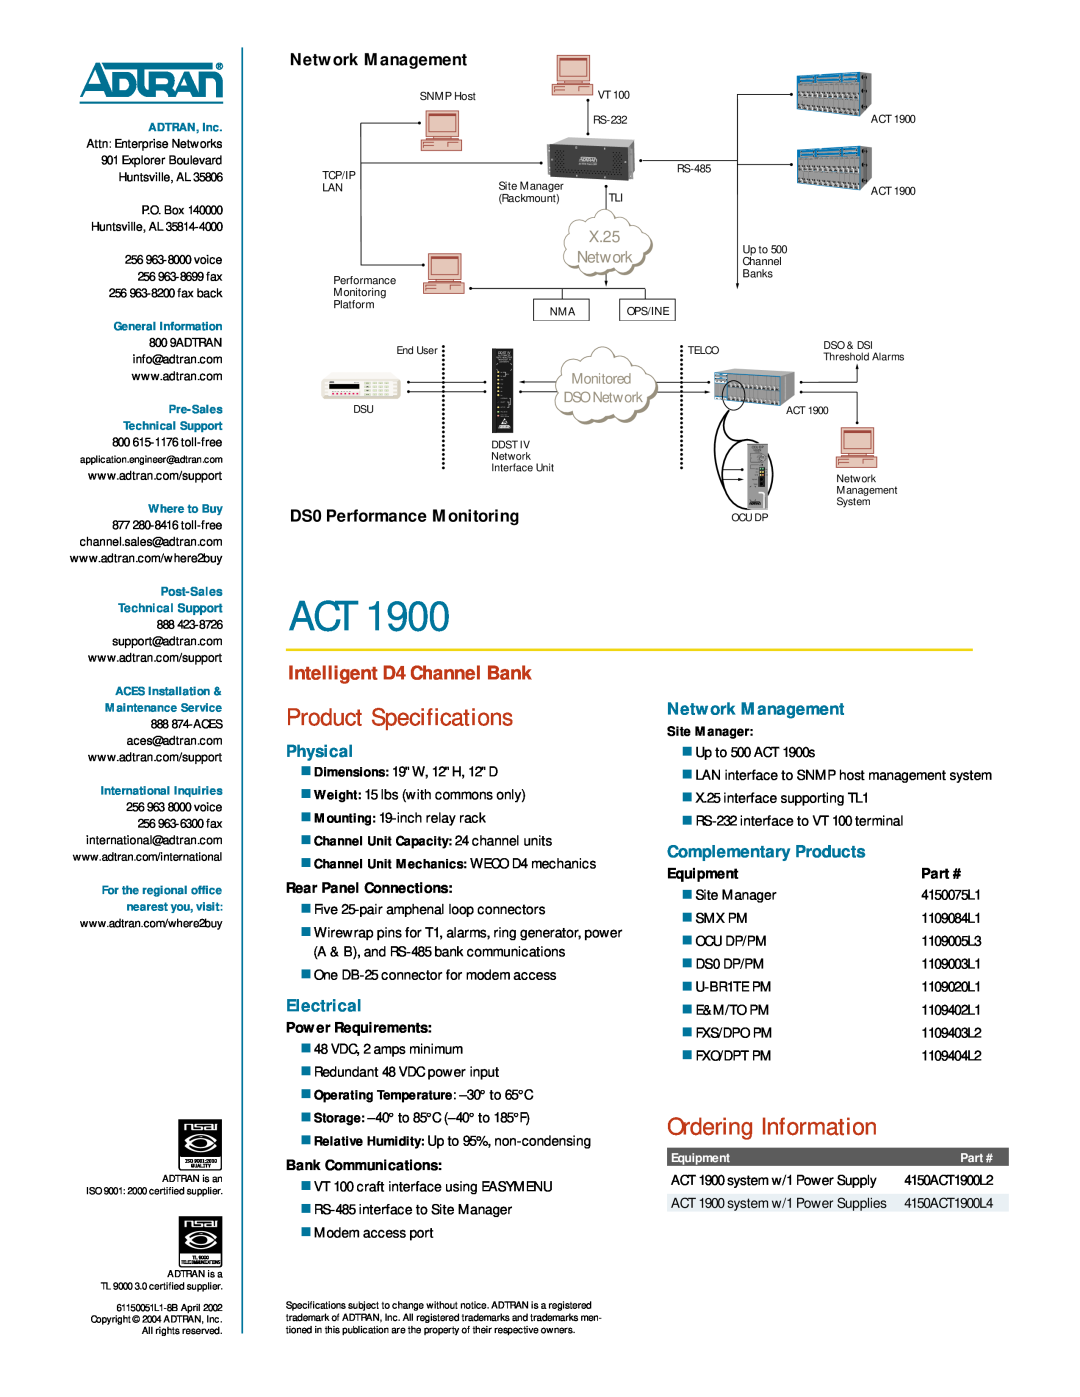 ADTRAN ACT 1900 Product Specifications, Ordering Information, Monitored, Intelligent D4 Channel Bank, Network Management 